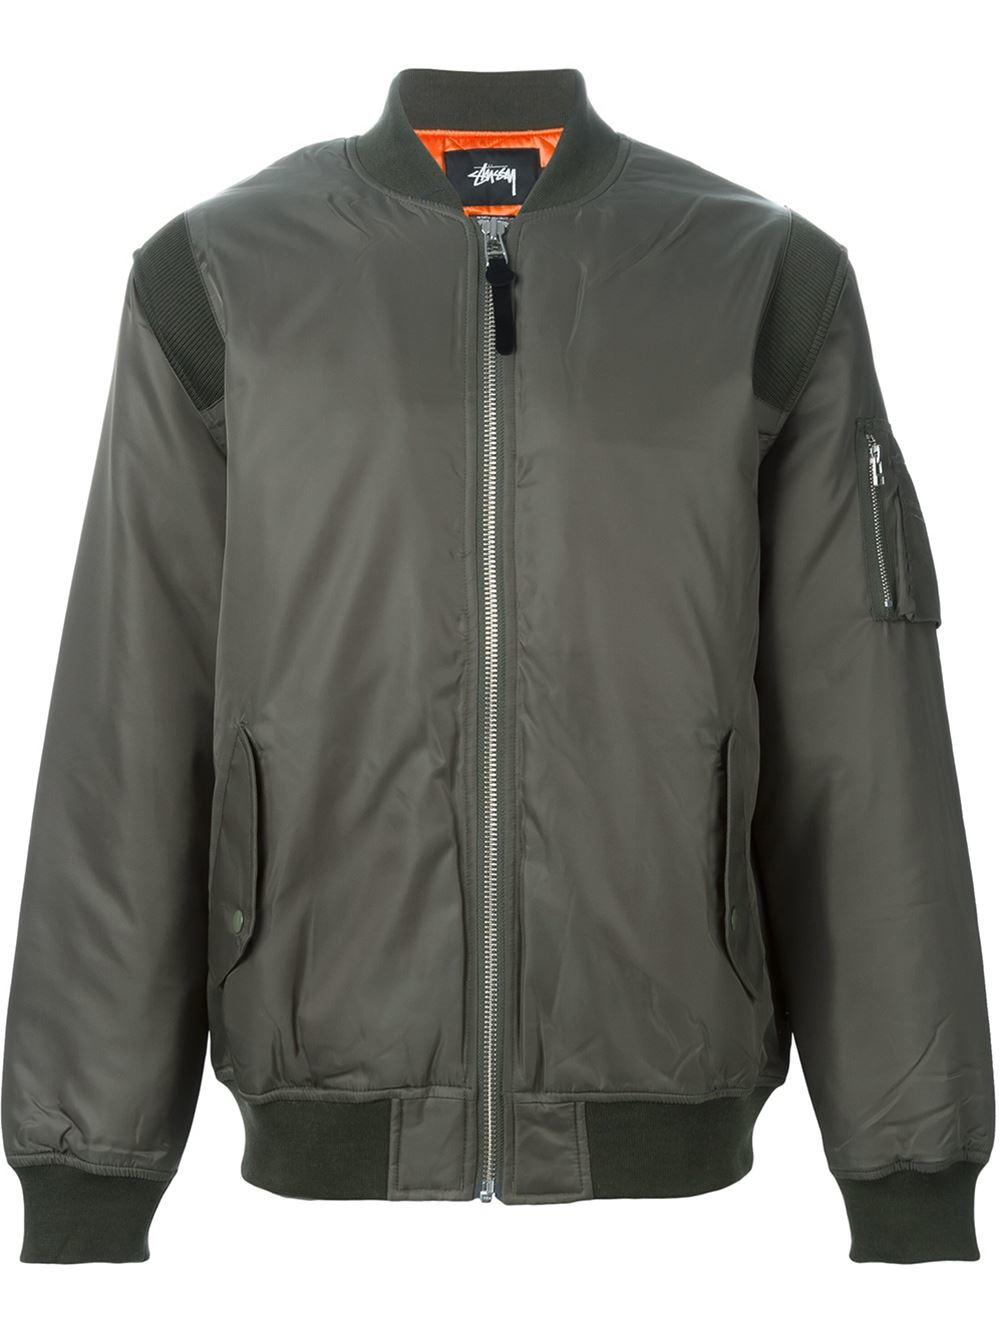 Lyst - Stussy Classic Bomber Jacket in Green for Men